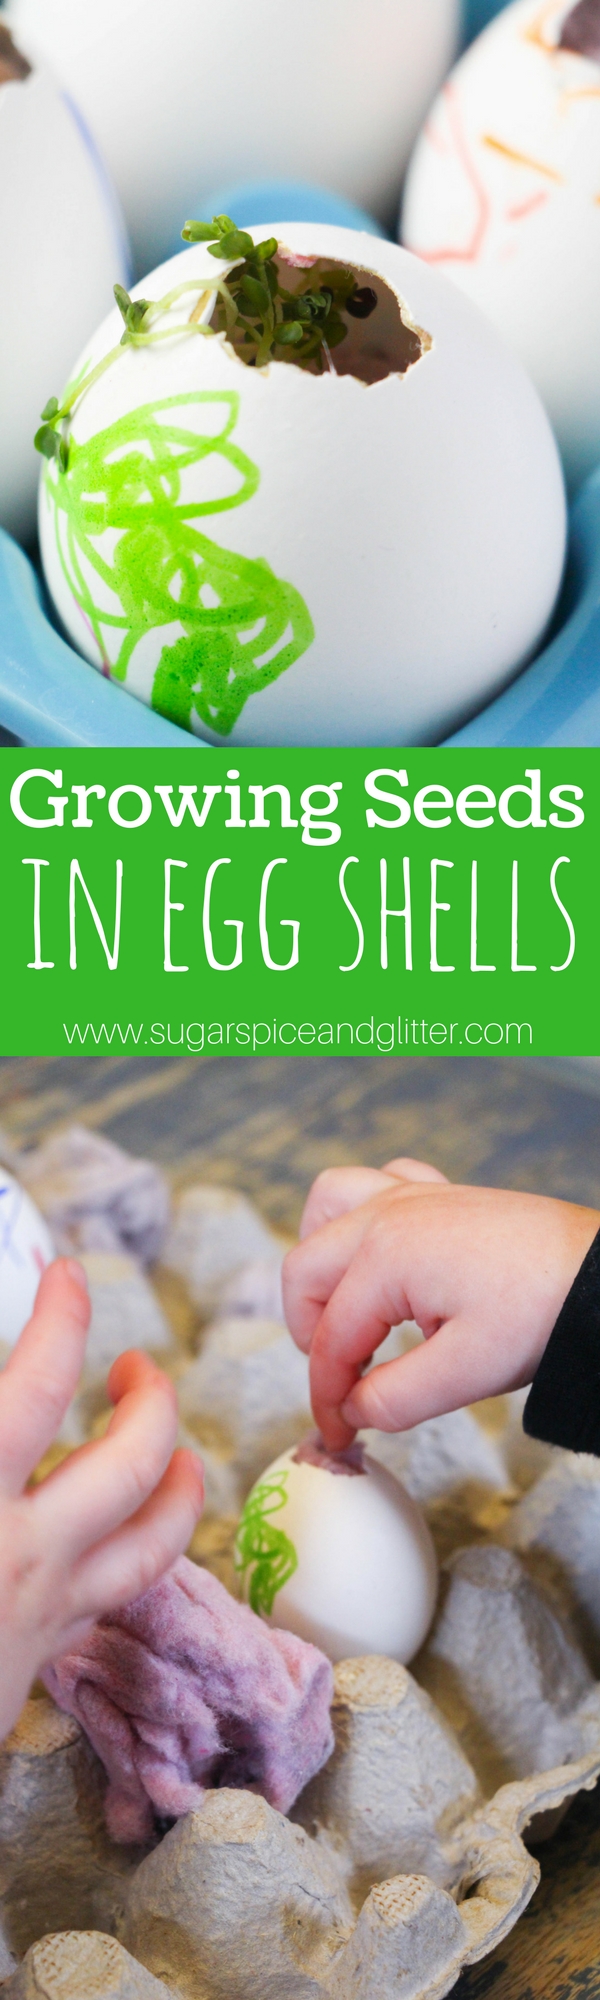 A fun kids' kitchen science experiment: growing seeds in egg shells. For our botany with kids series, we grew shamrocks in decorated eggs for a Spring science experiment